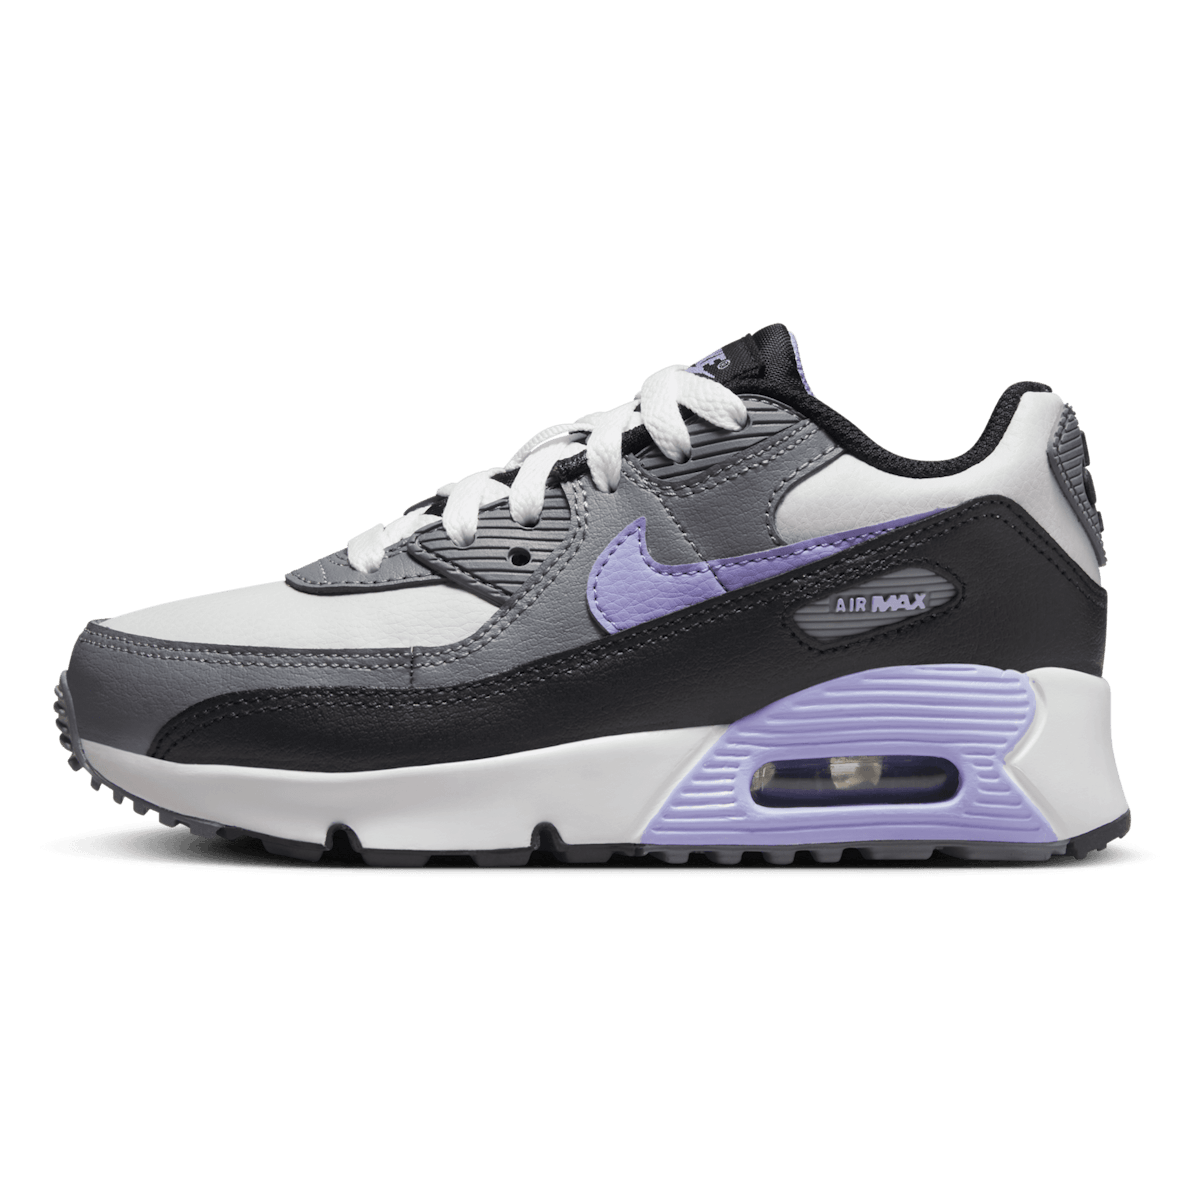 Nike Air Max 90 LTR PS "Light Thistle"